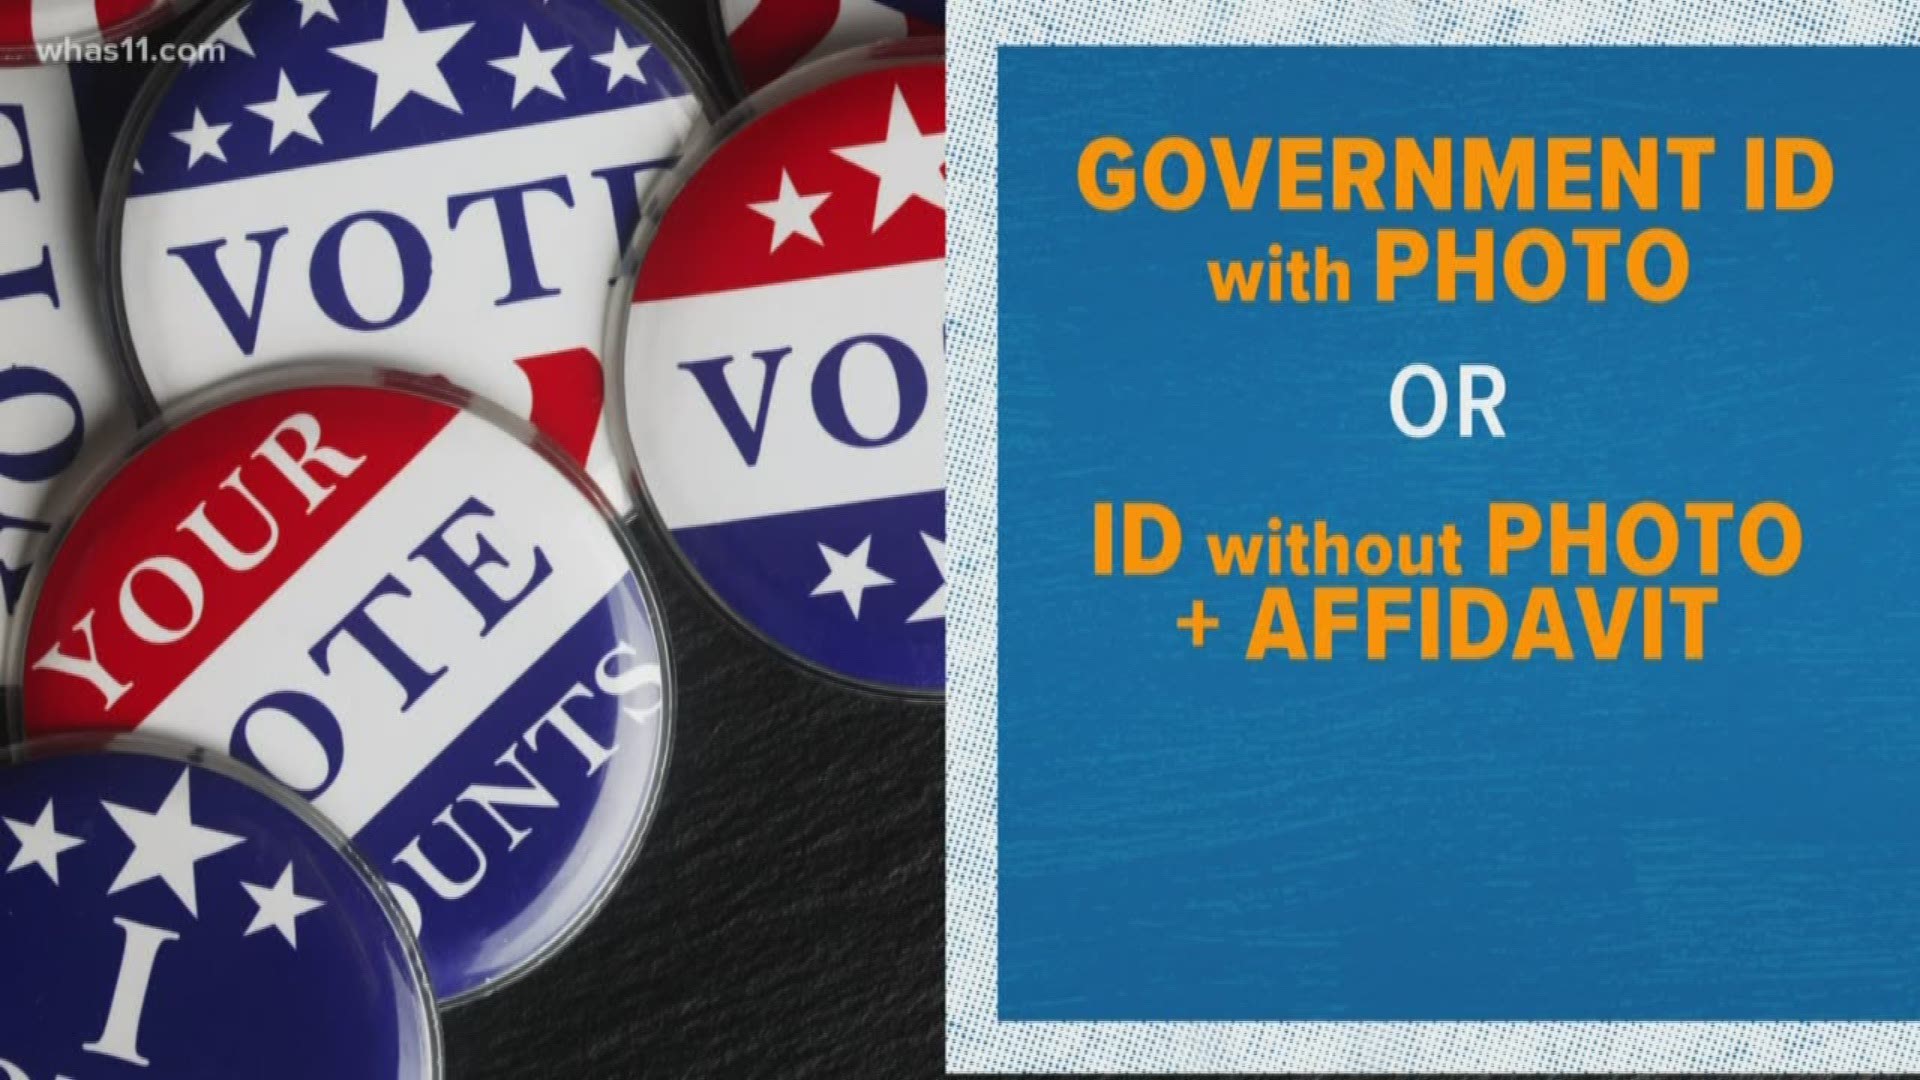 A new voter ID bill is one step closer to becoming law.